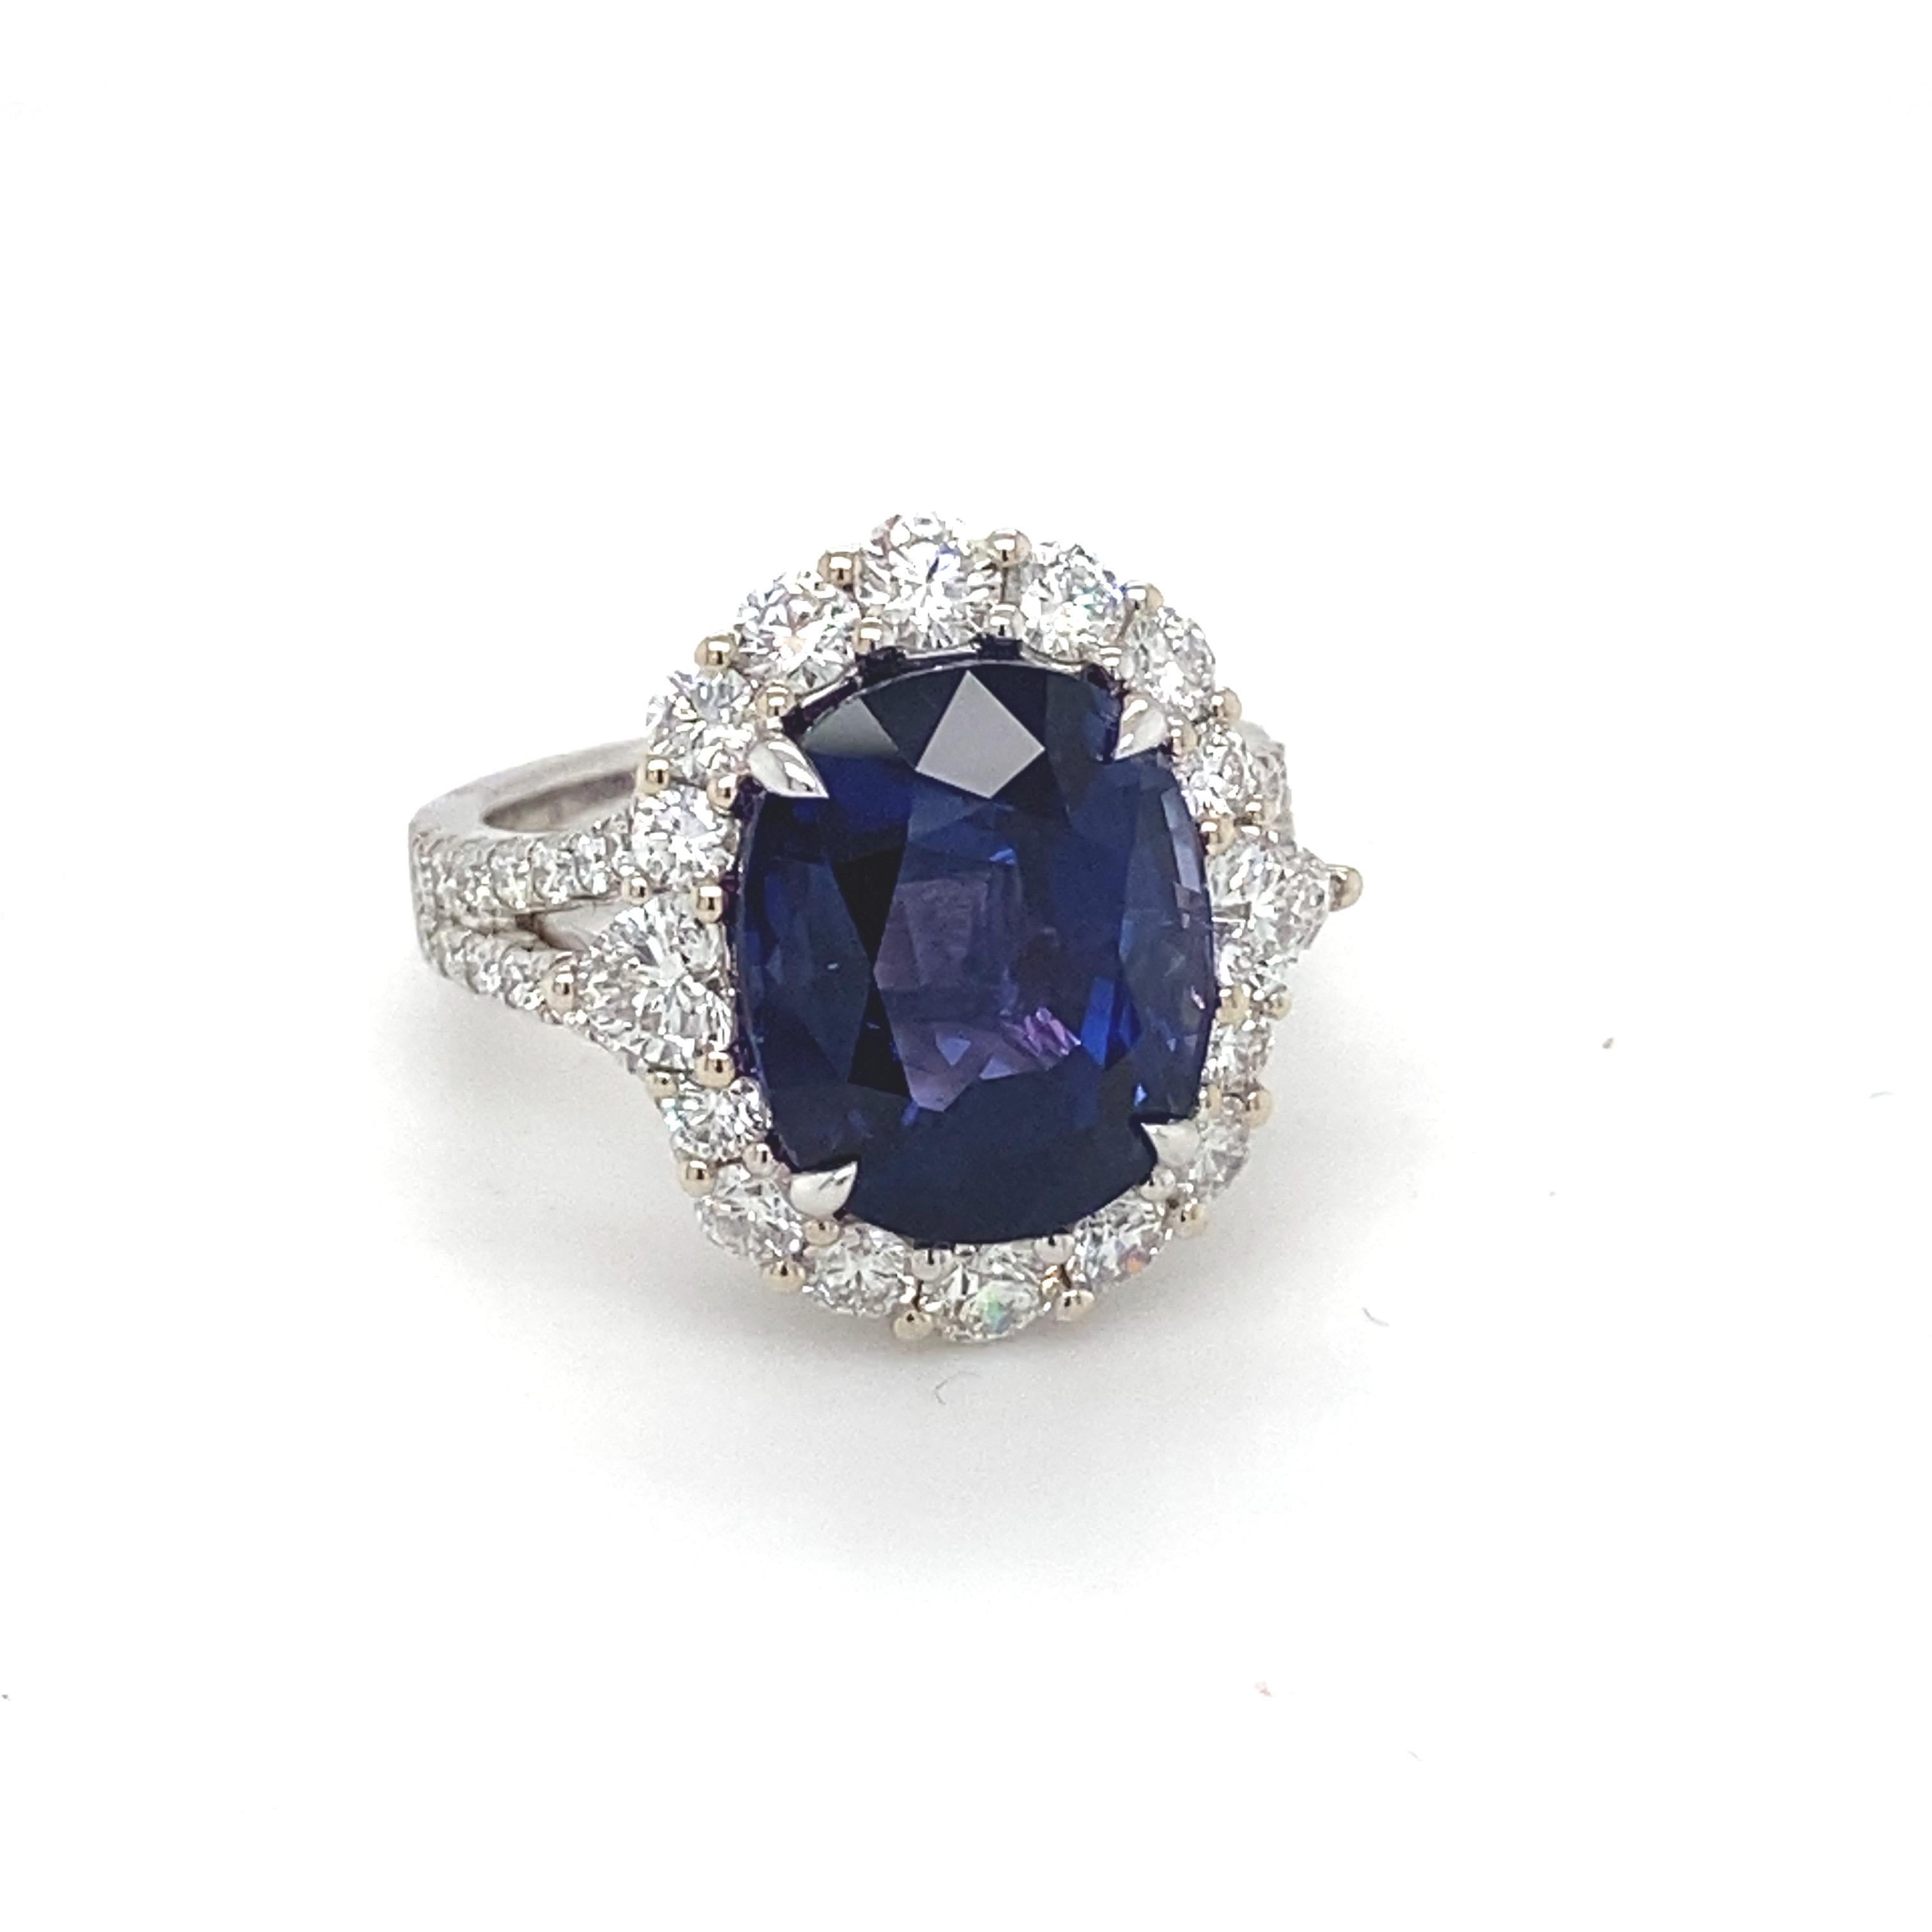 GIA Certified 10.04 Carat Violet Blue Oval Sapphire Diamond Engagement Ring  For Sale 12